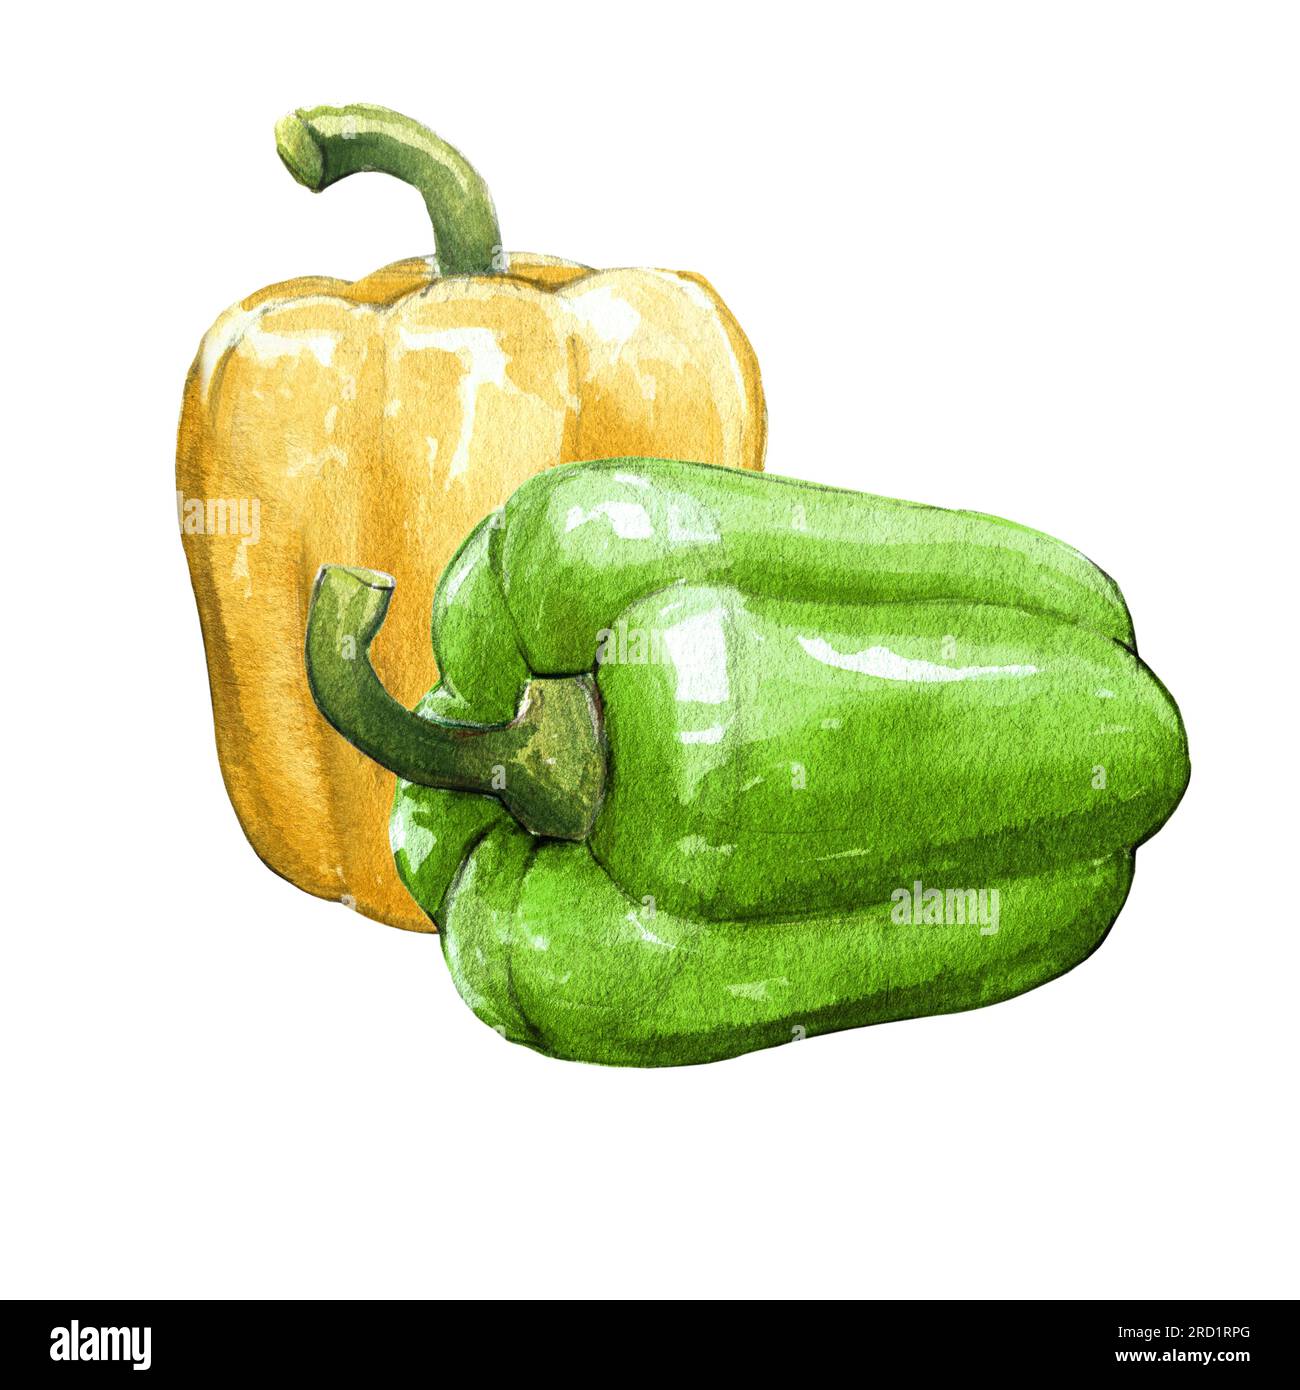 yellow bell pepper watercolor illustration on white background Stock Photo